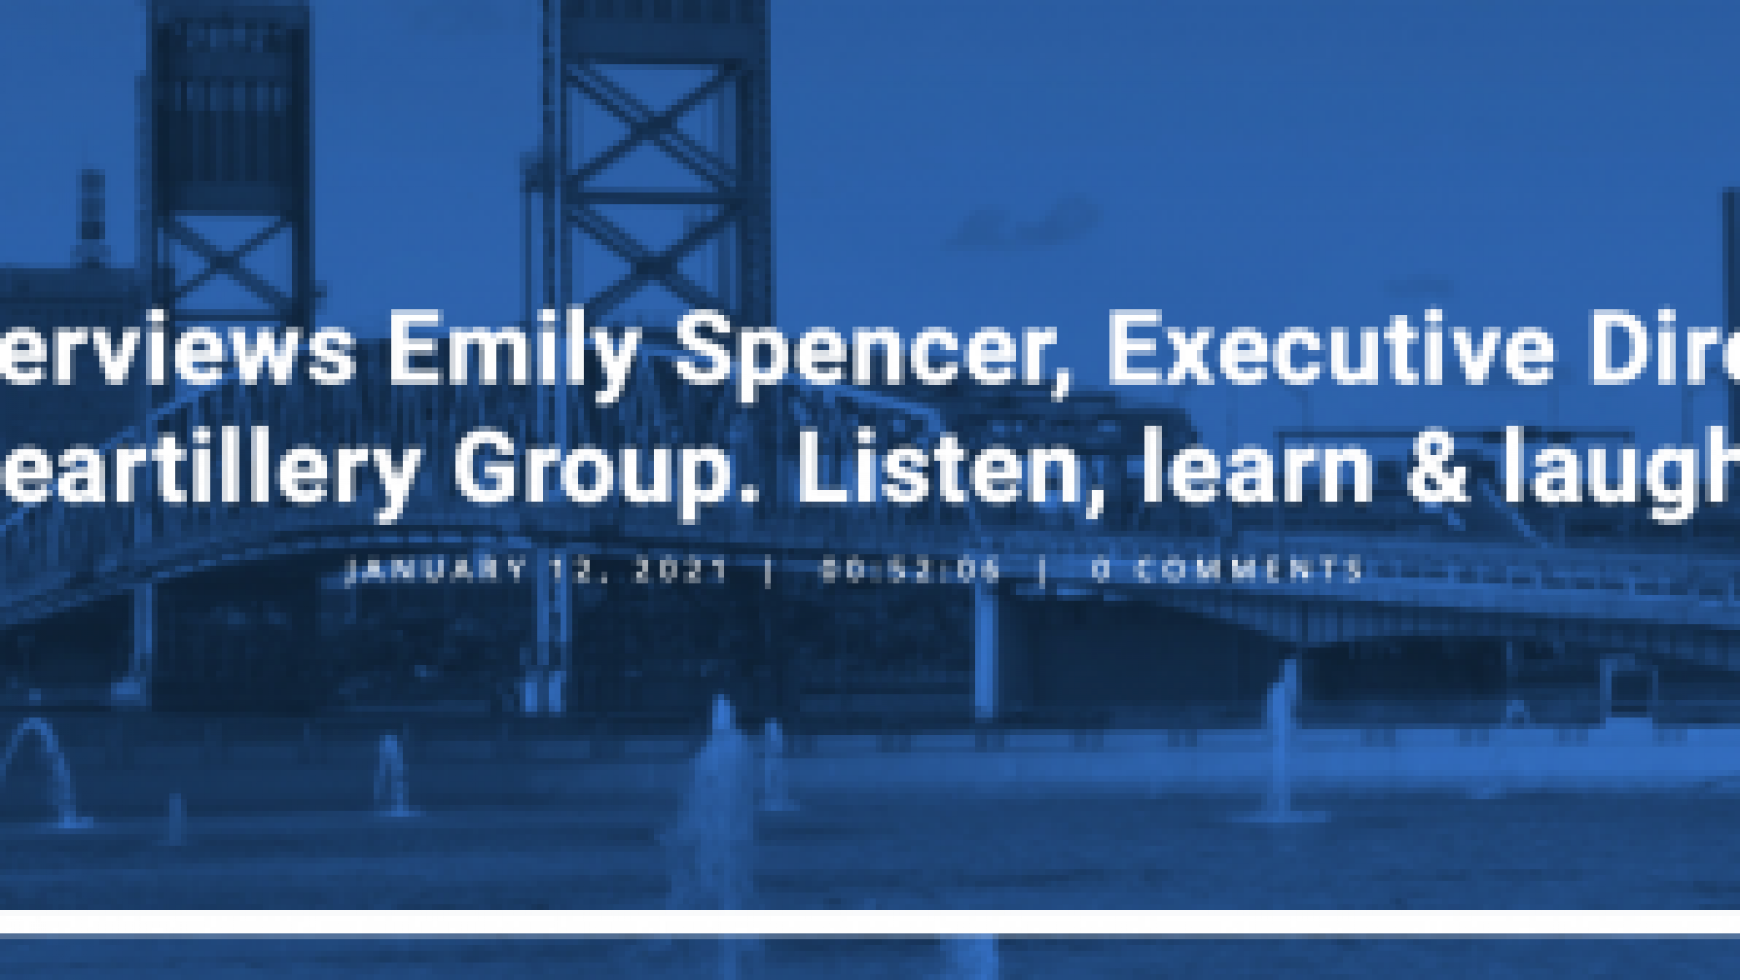 Pete The Job Guy interviews Emily Spencer, Executive Director of Heartillery Group. Listen, learn & laugh!